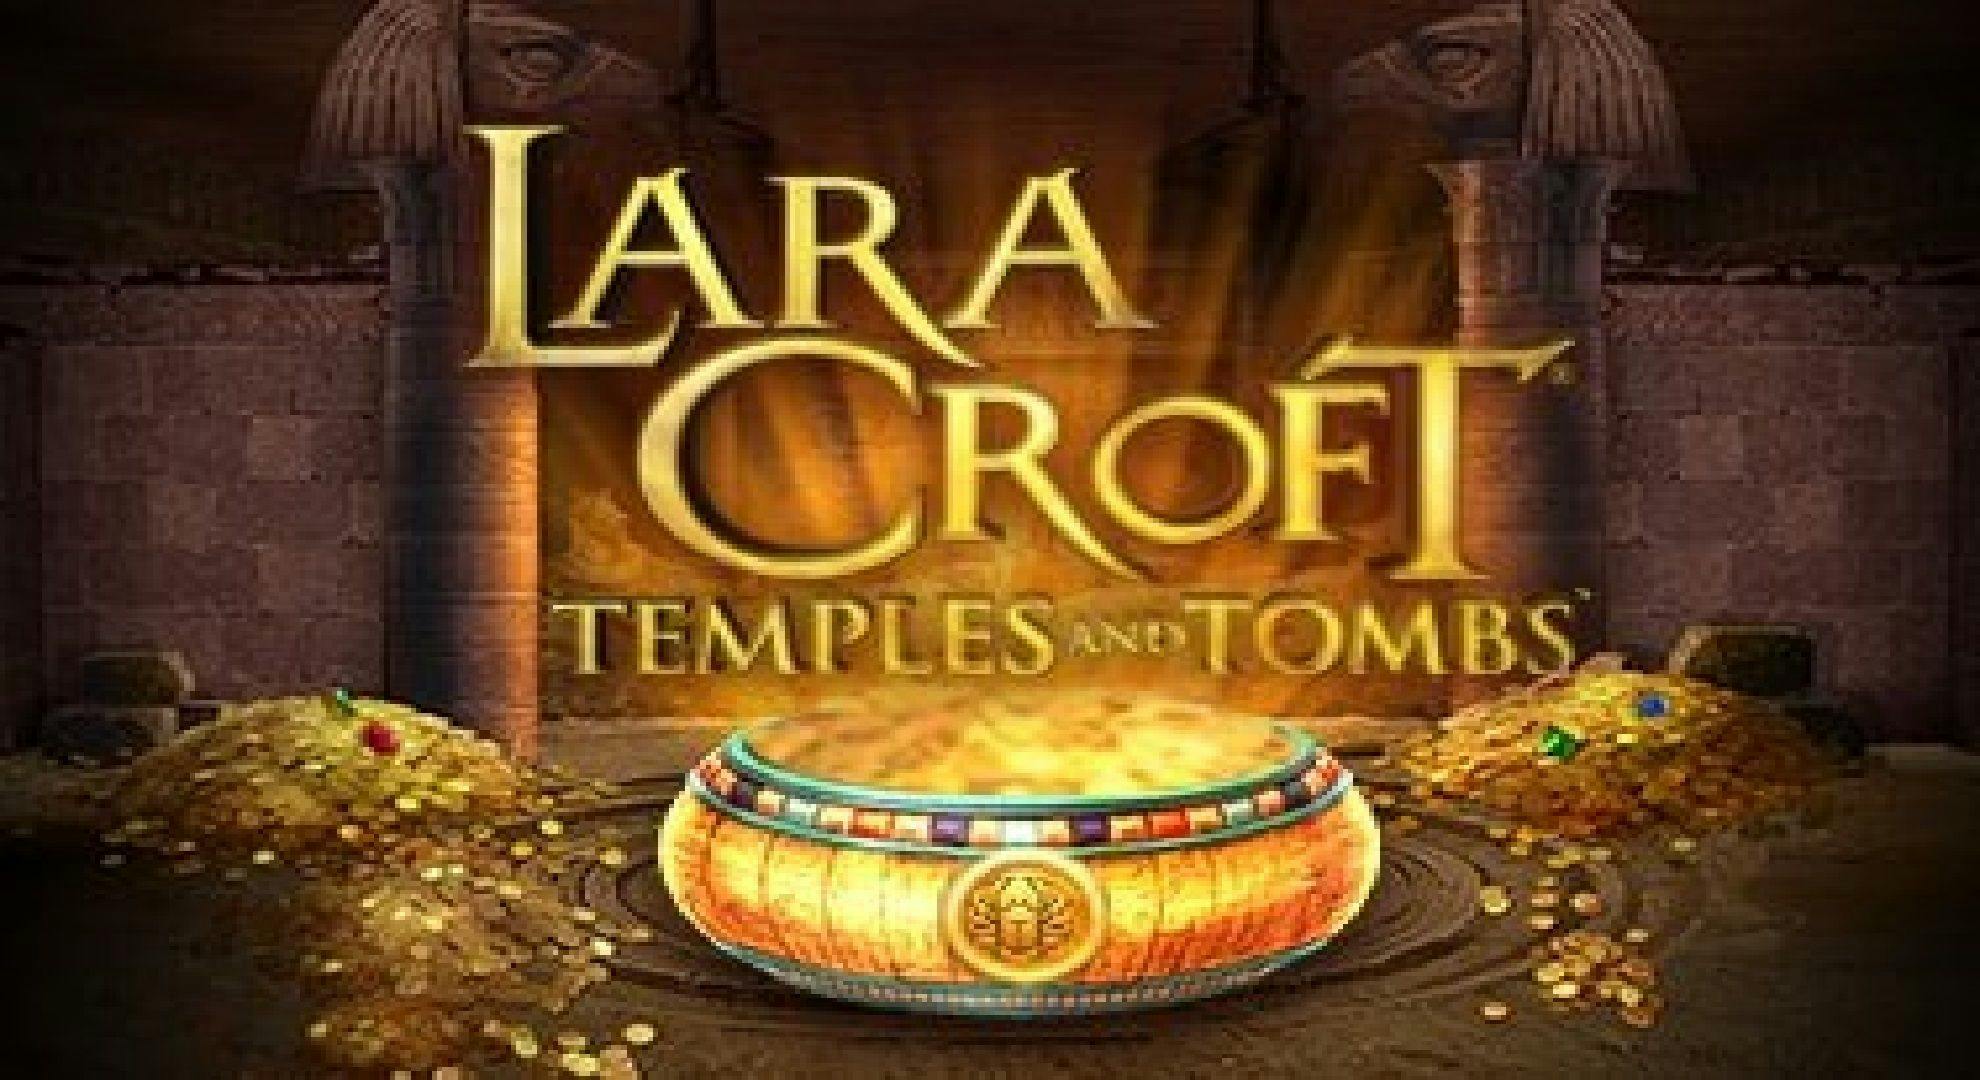 Lara Croft: Temples and Tombs Slot Online Free Play